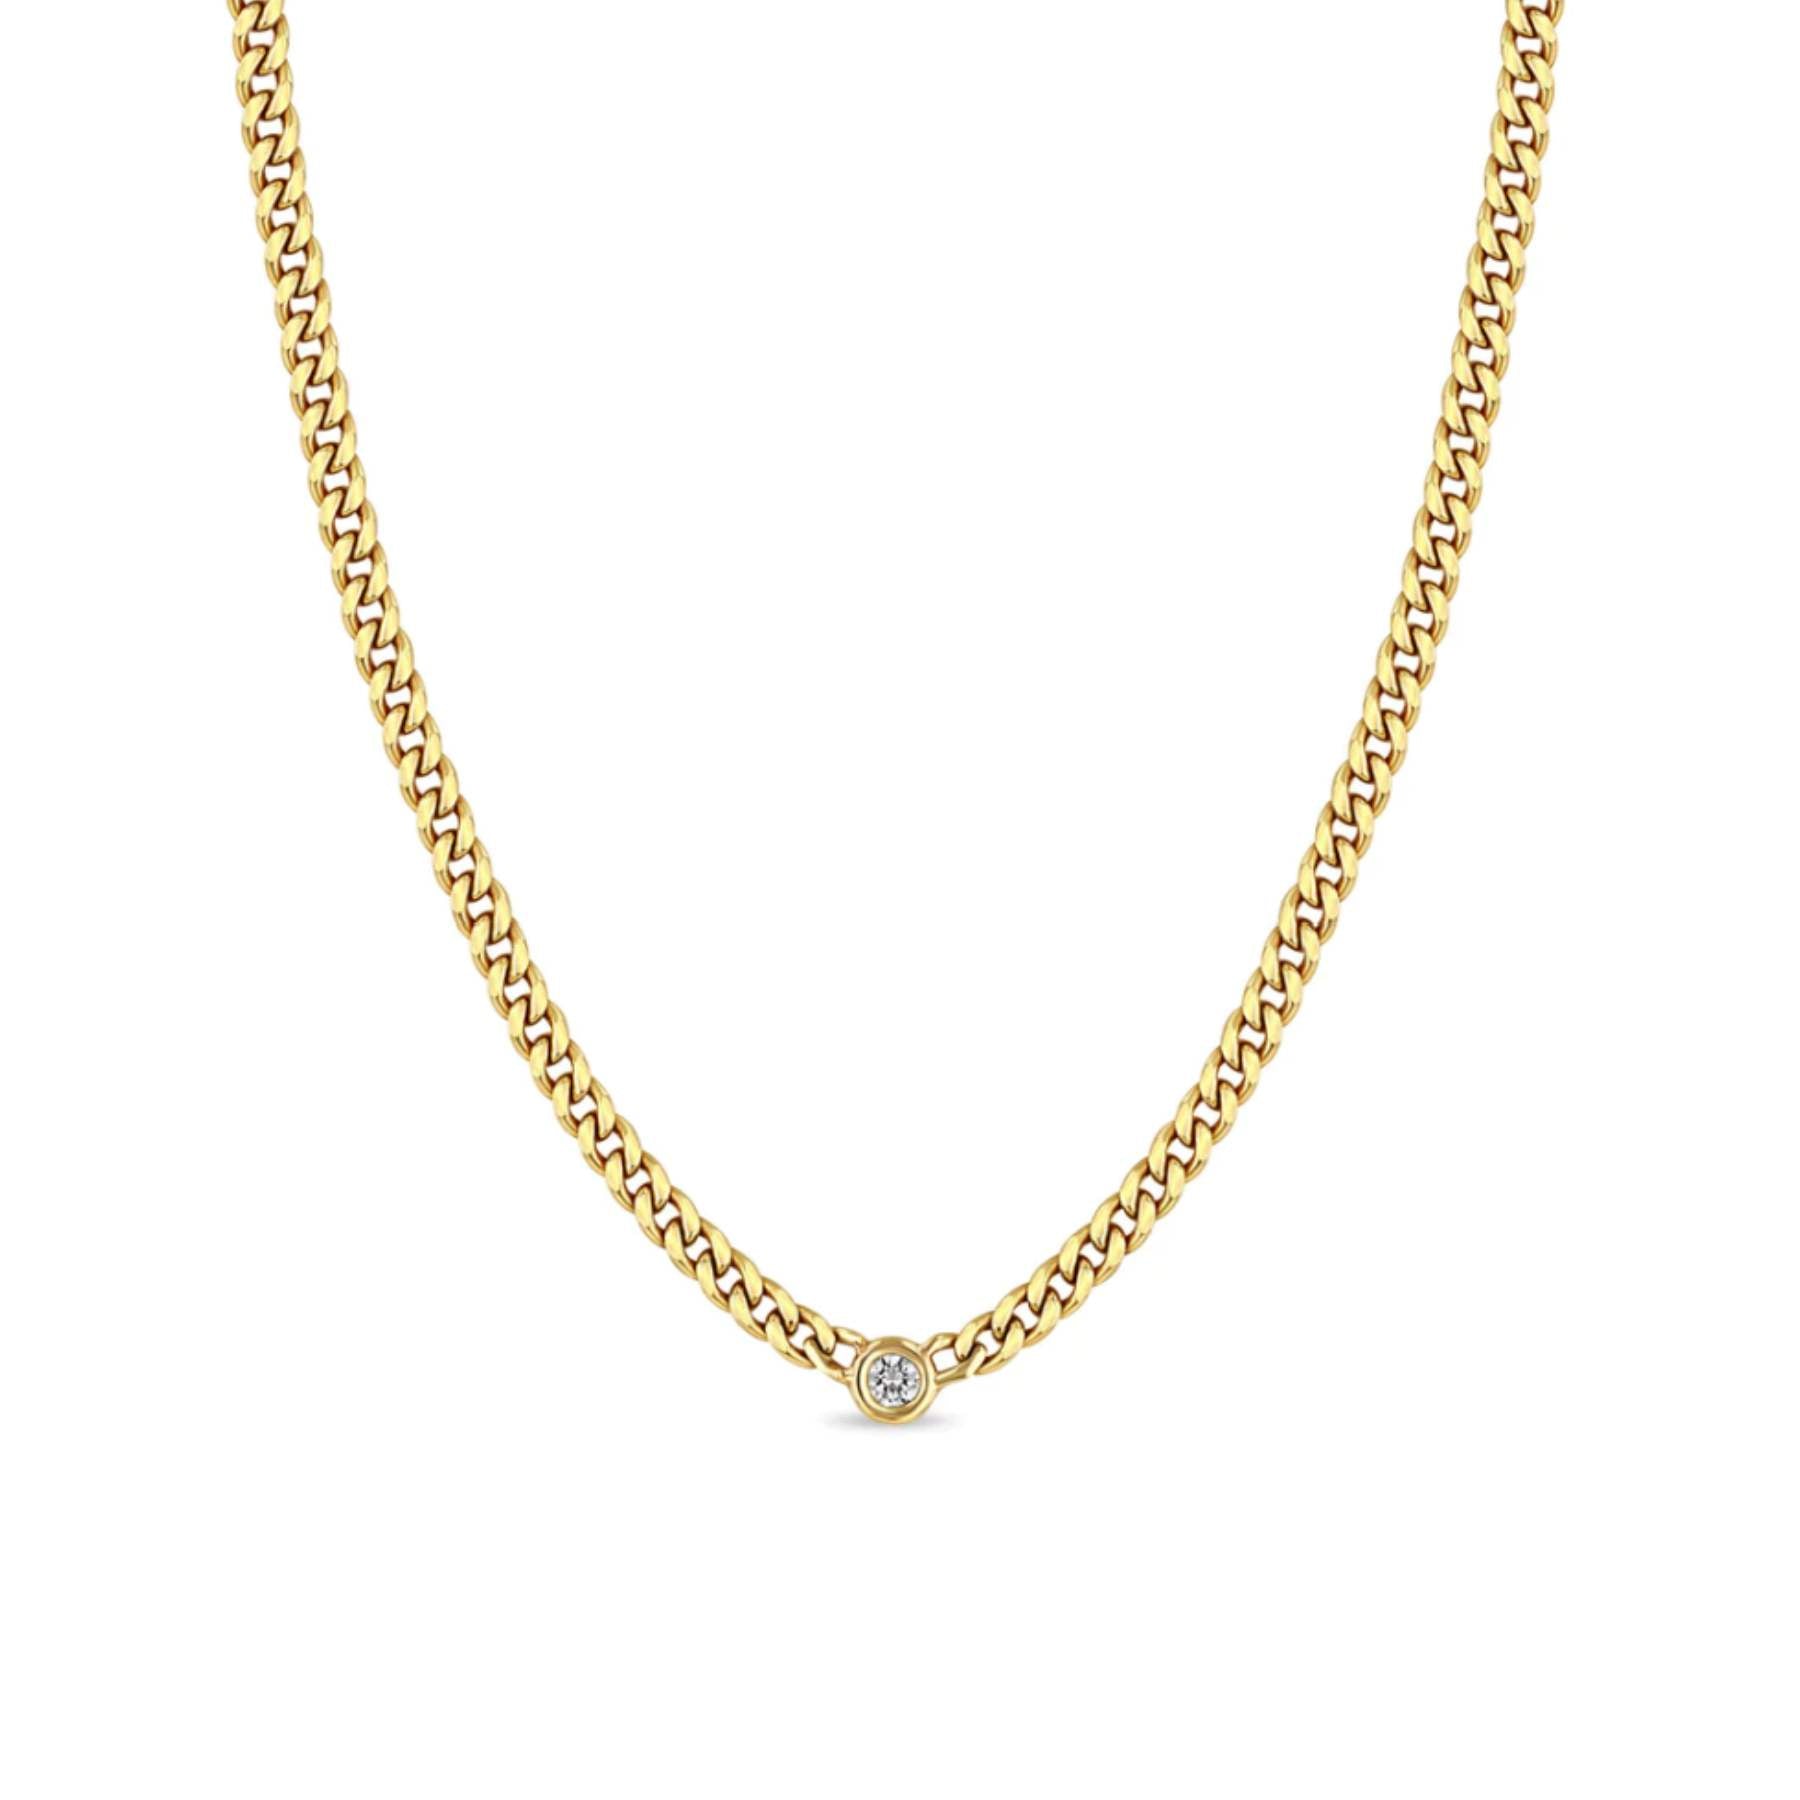 14K Yellow Gold 1.3mm Flat Diamond-Cut Curb Chain Necklace - 18 Inches